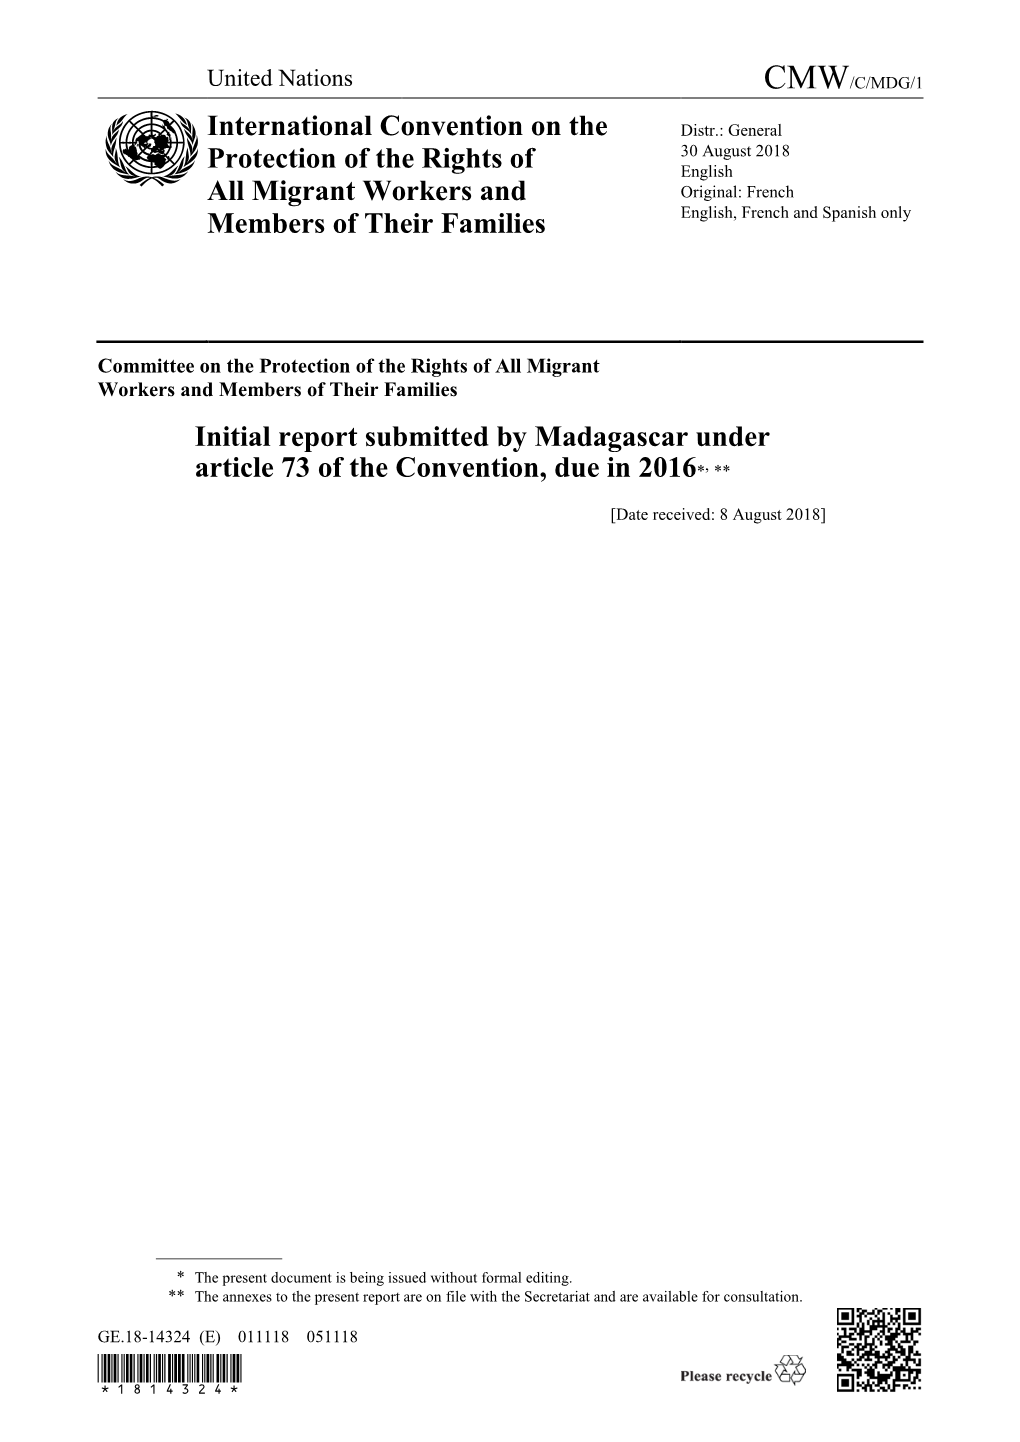 Initial Report Submitted by Madagascar Under Article 73 of the Convention, Due in 2016*, **